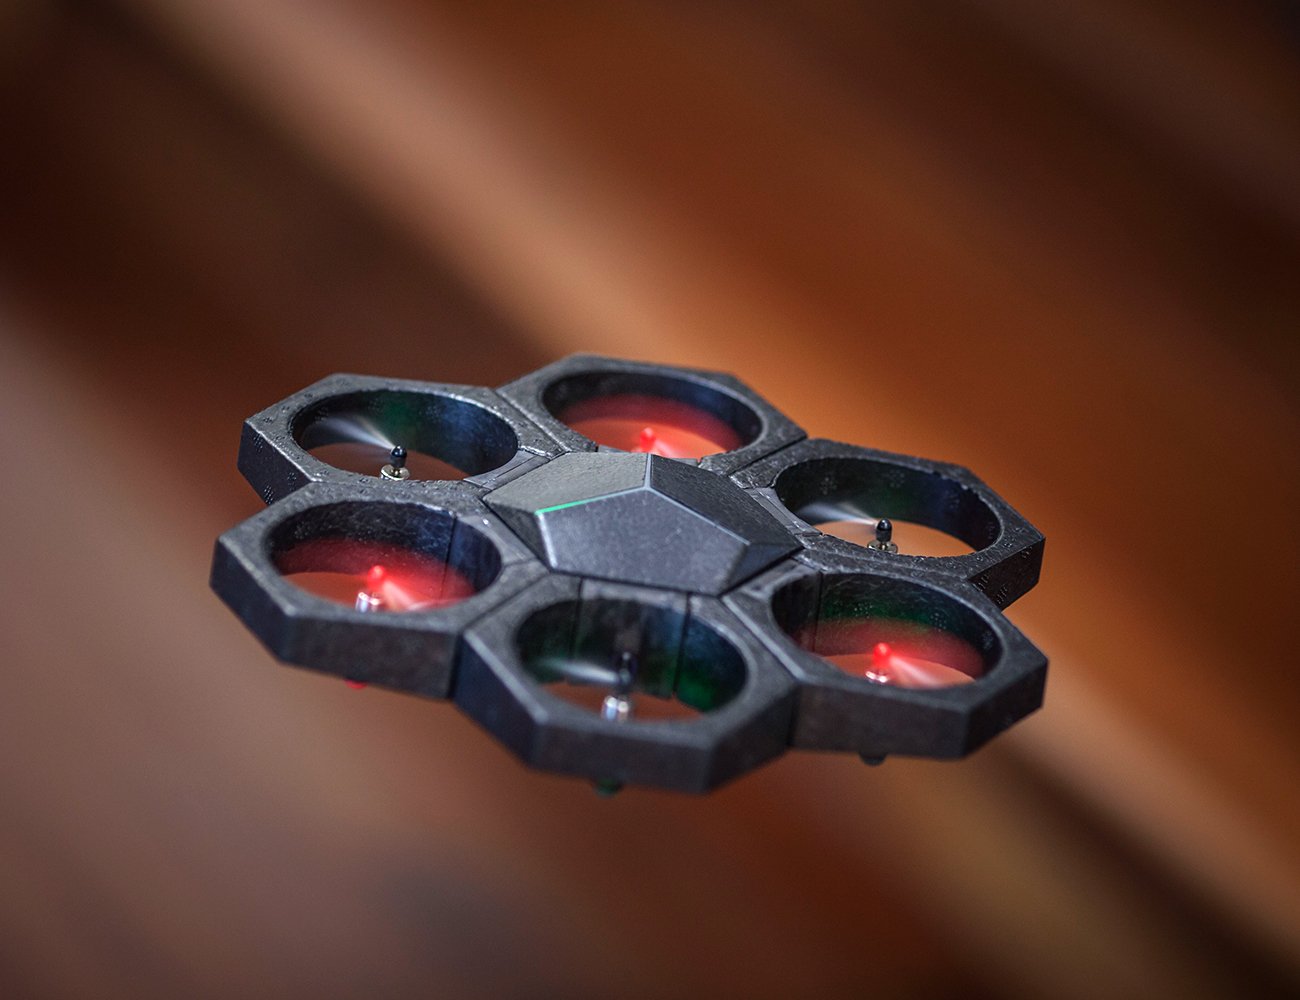 AIRBLOCK – The Easiest Programmable And Convertible Drone